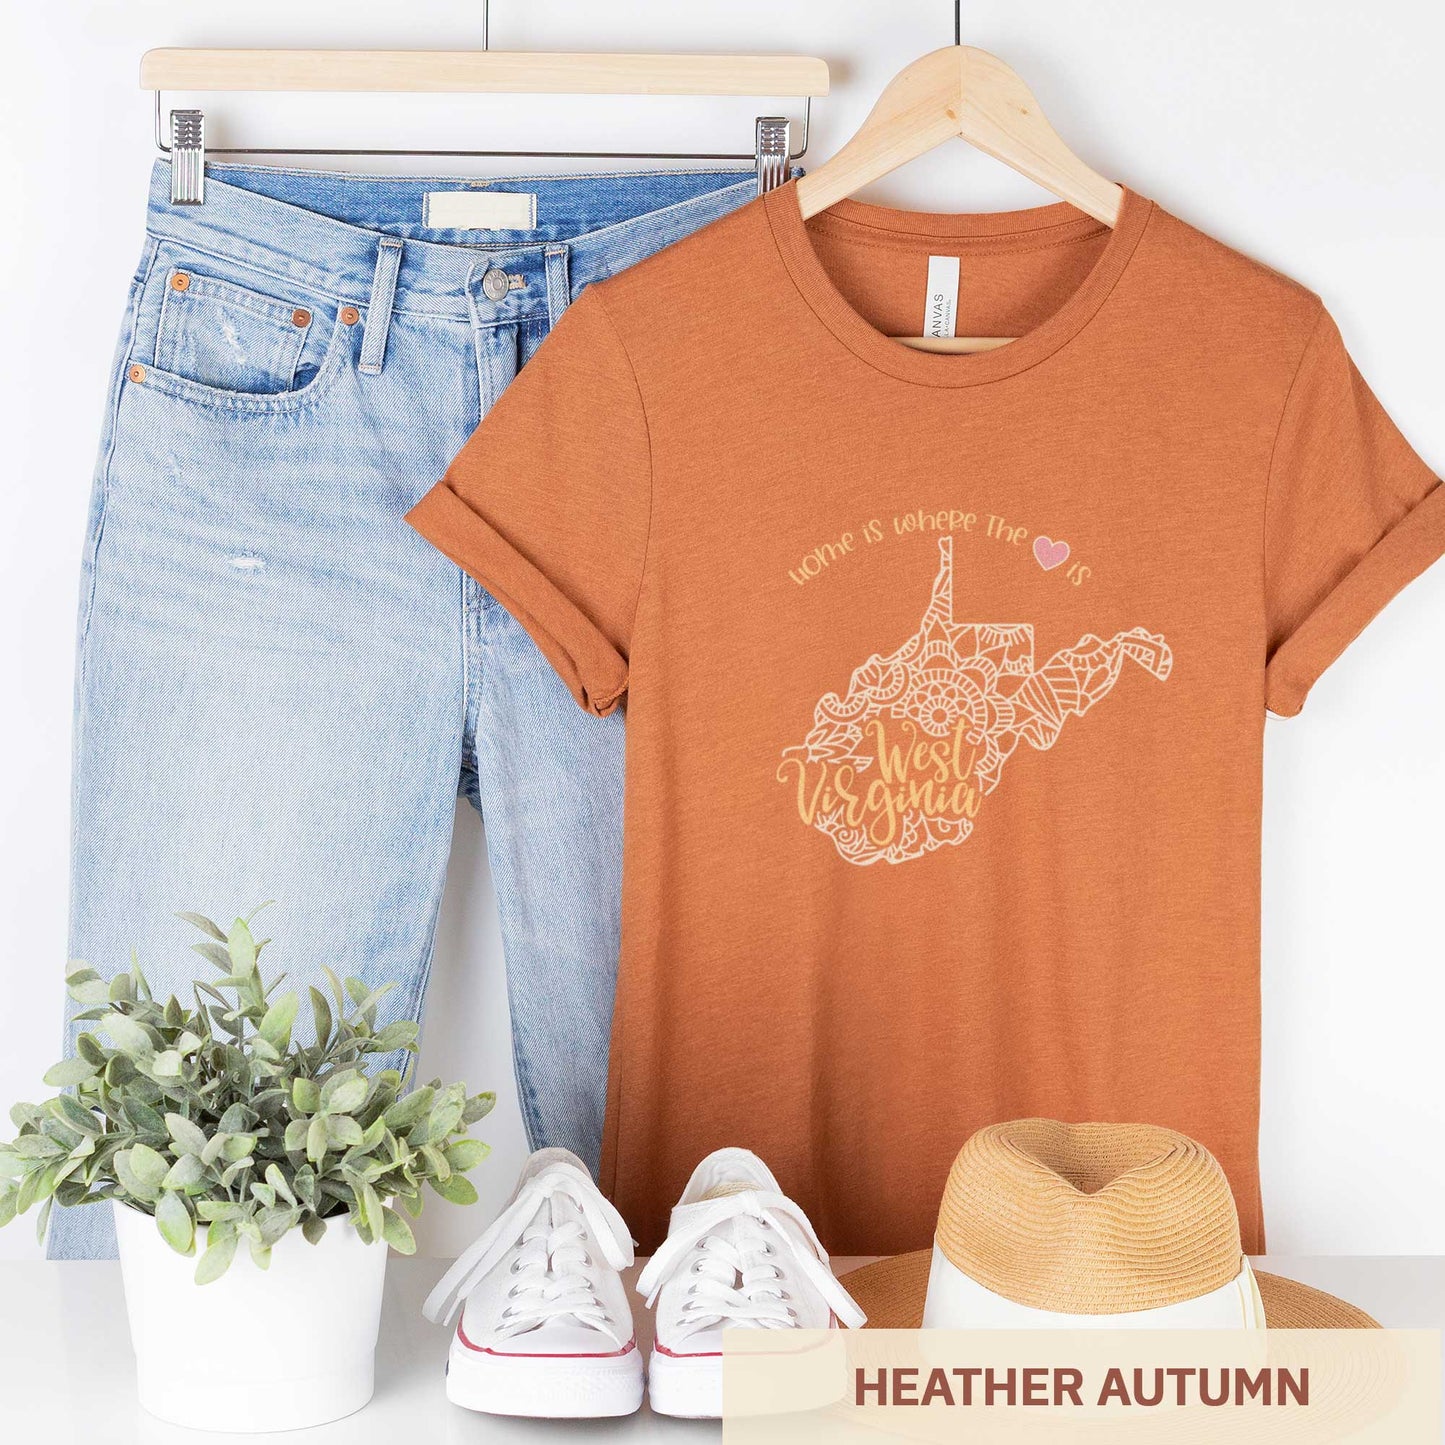 A hanging heather autumn Bella Canvas t-shirt featuring a mandala in the shape of West Virginia with the words home is where the heart is.